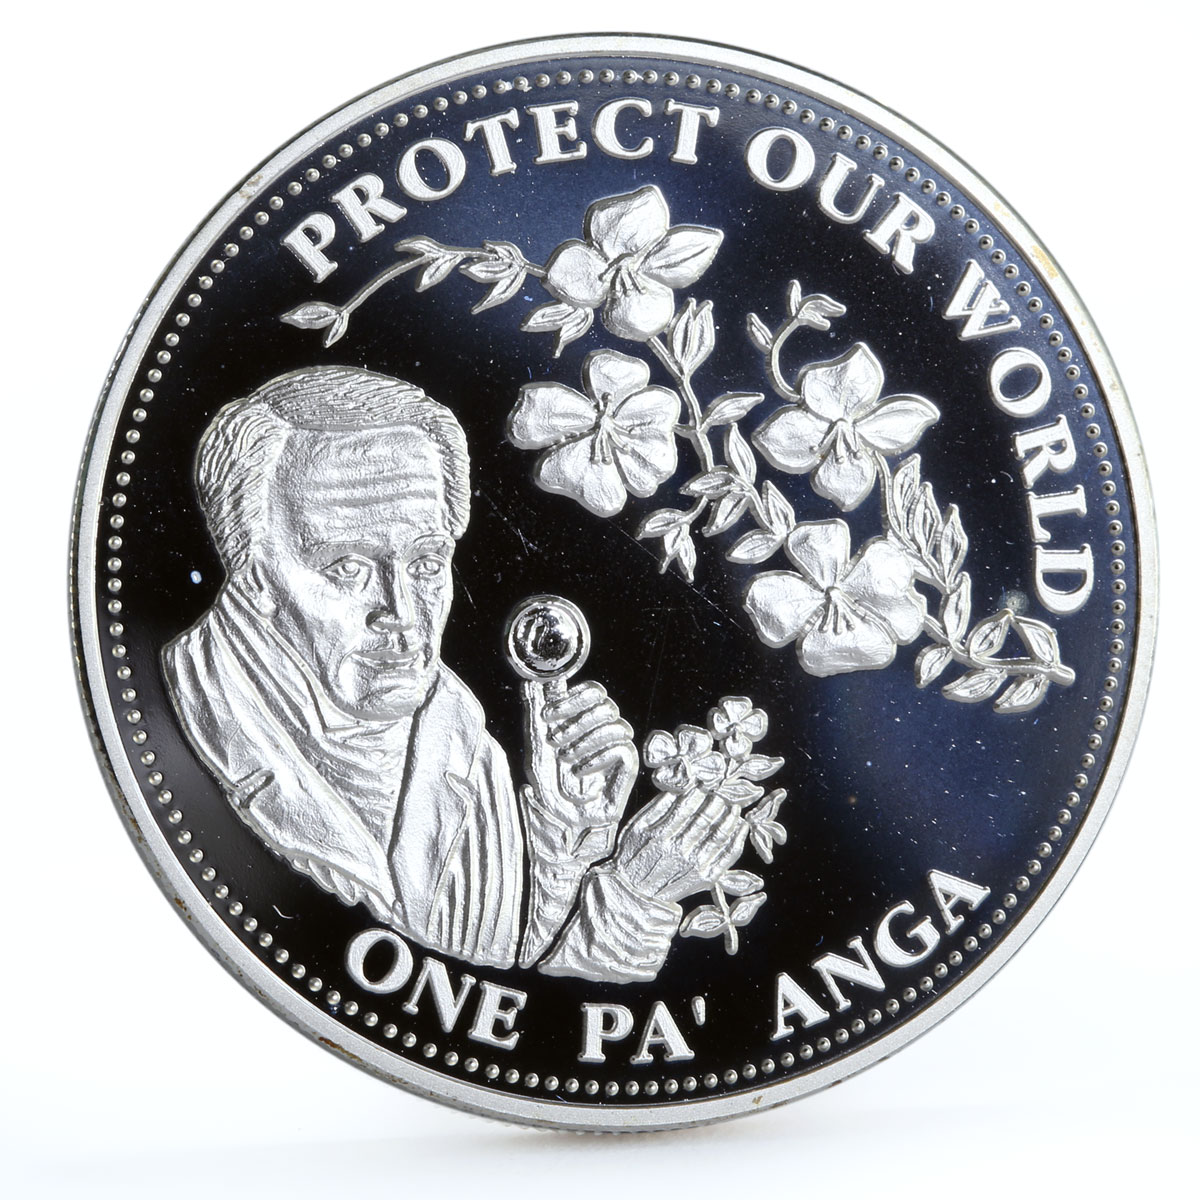 Tonga 1 paanga Protect Our World Alexander von Humboldt proof silver coin 1993